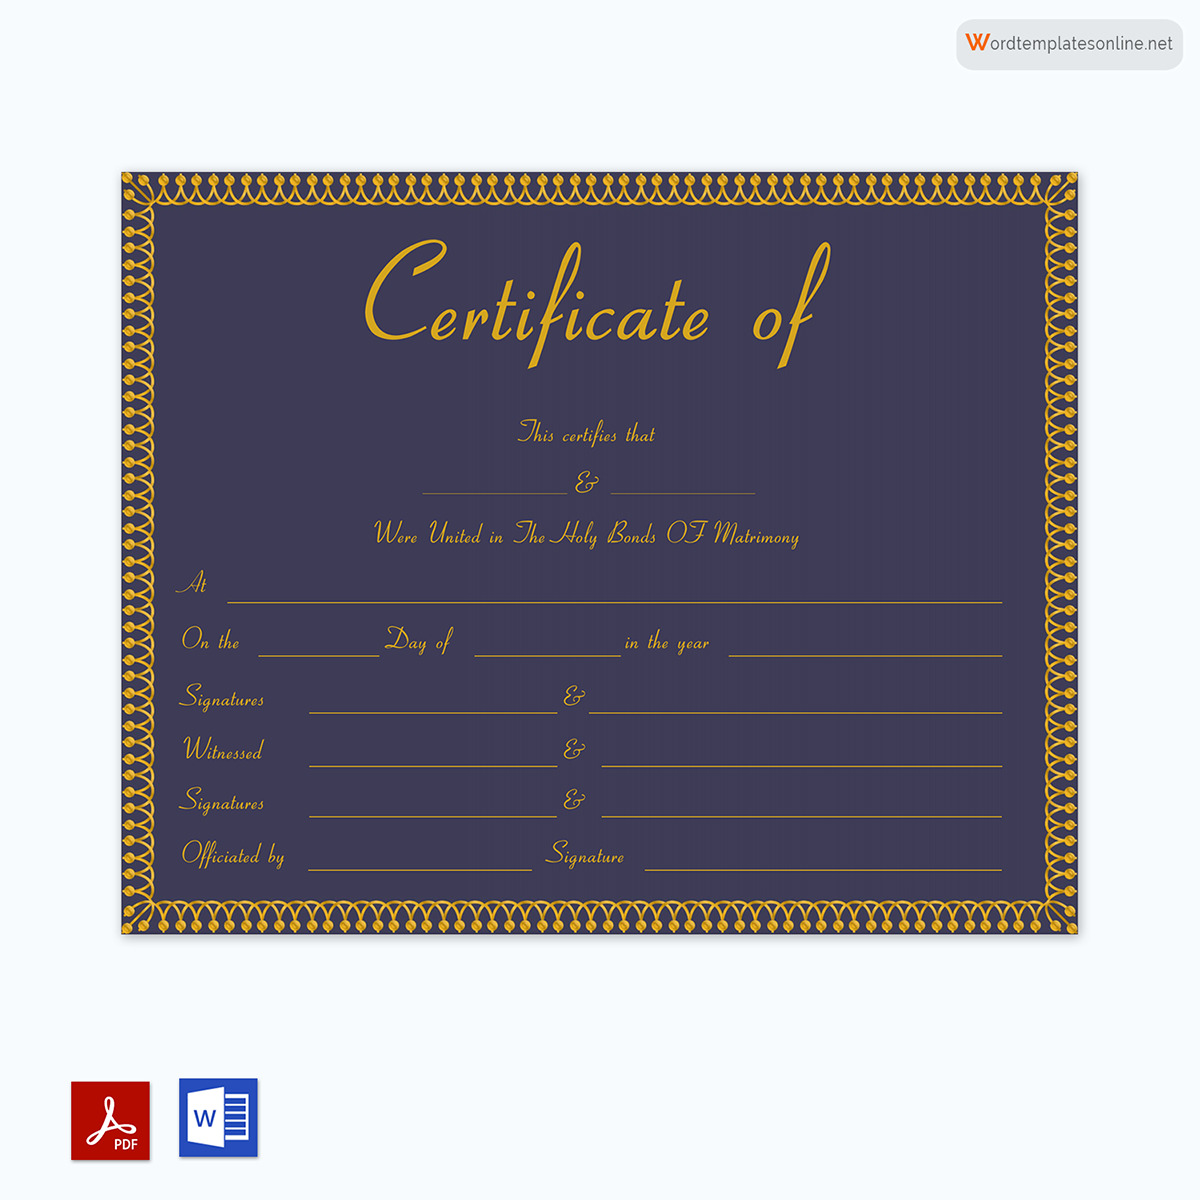 Marriage Certificate Sample